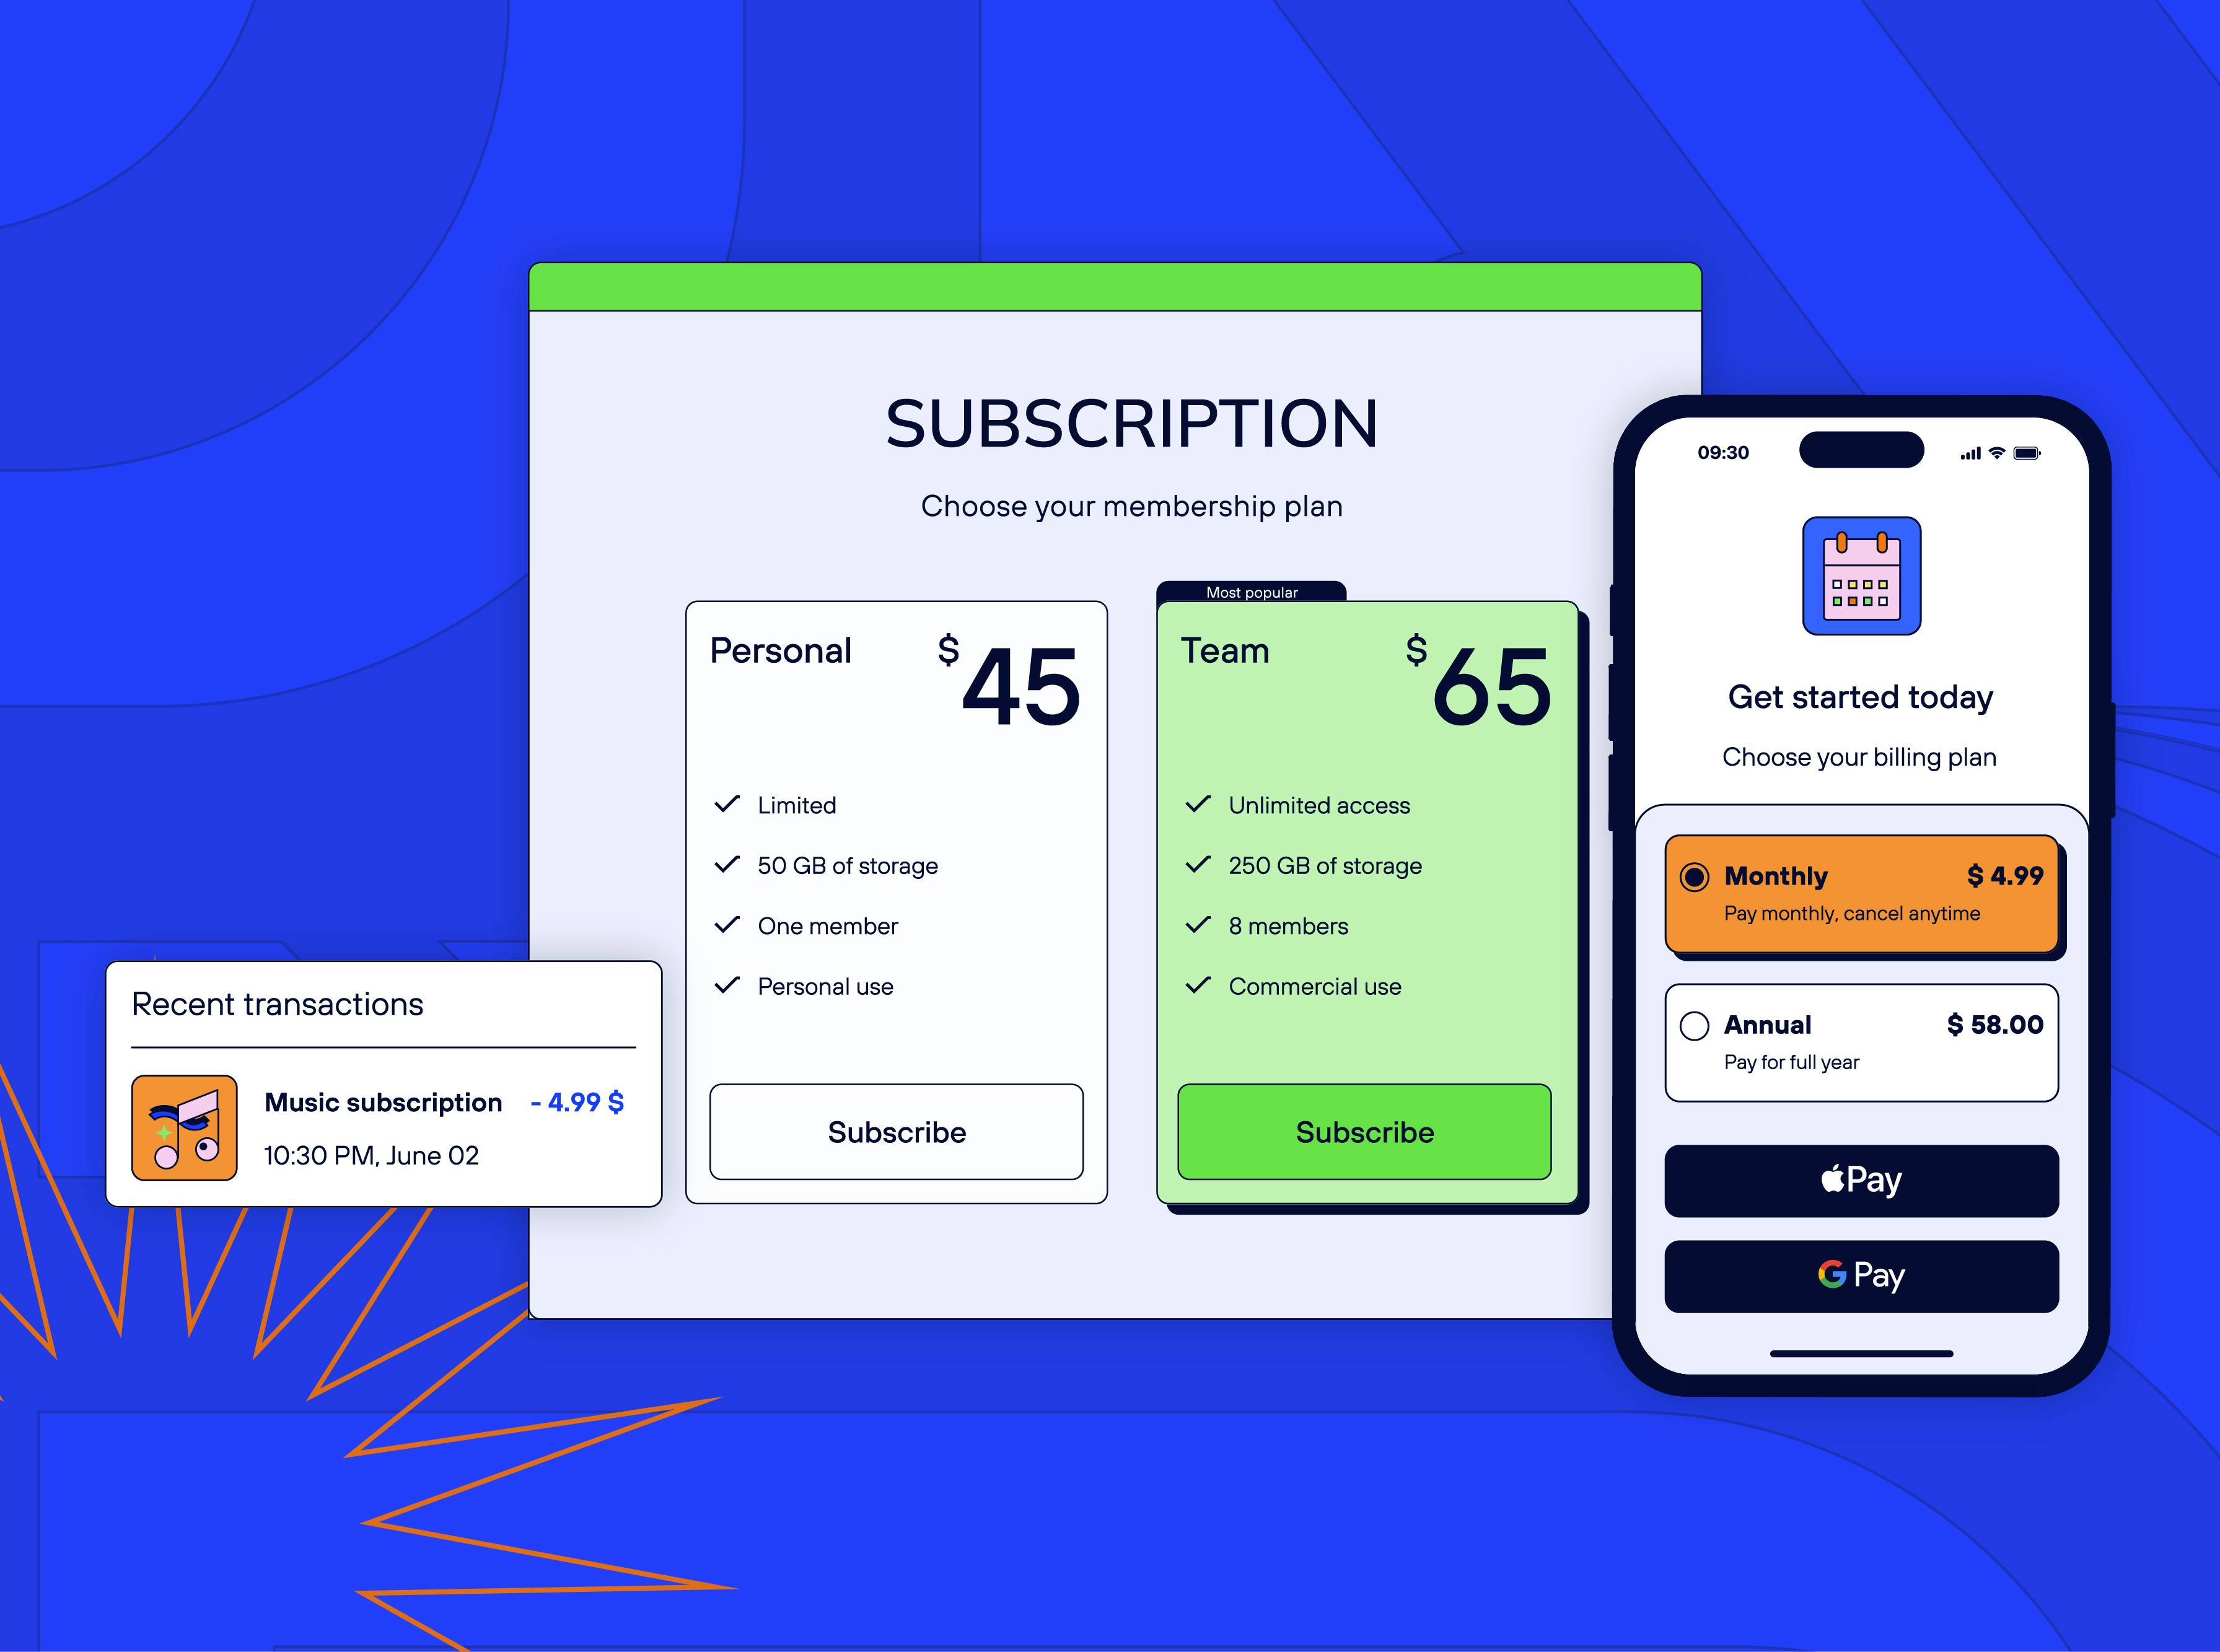 New features from Tranzzo for subscription businesses